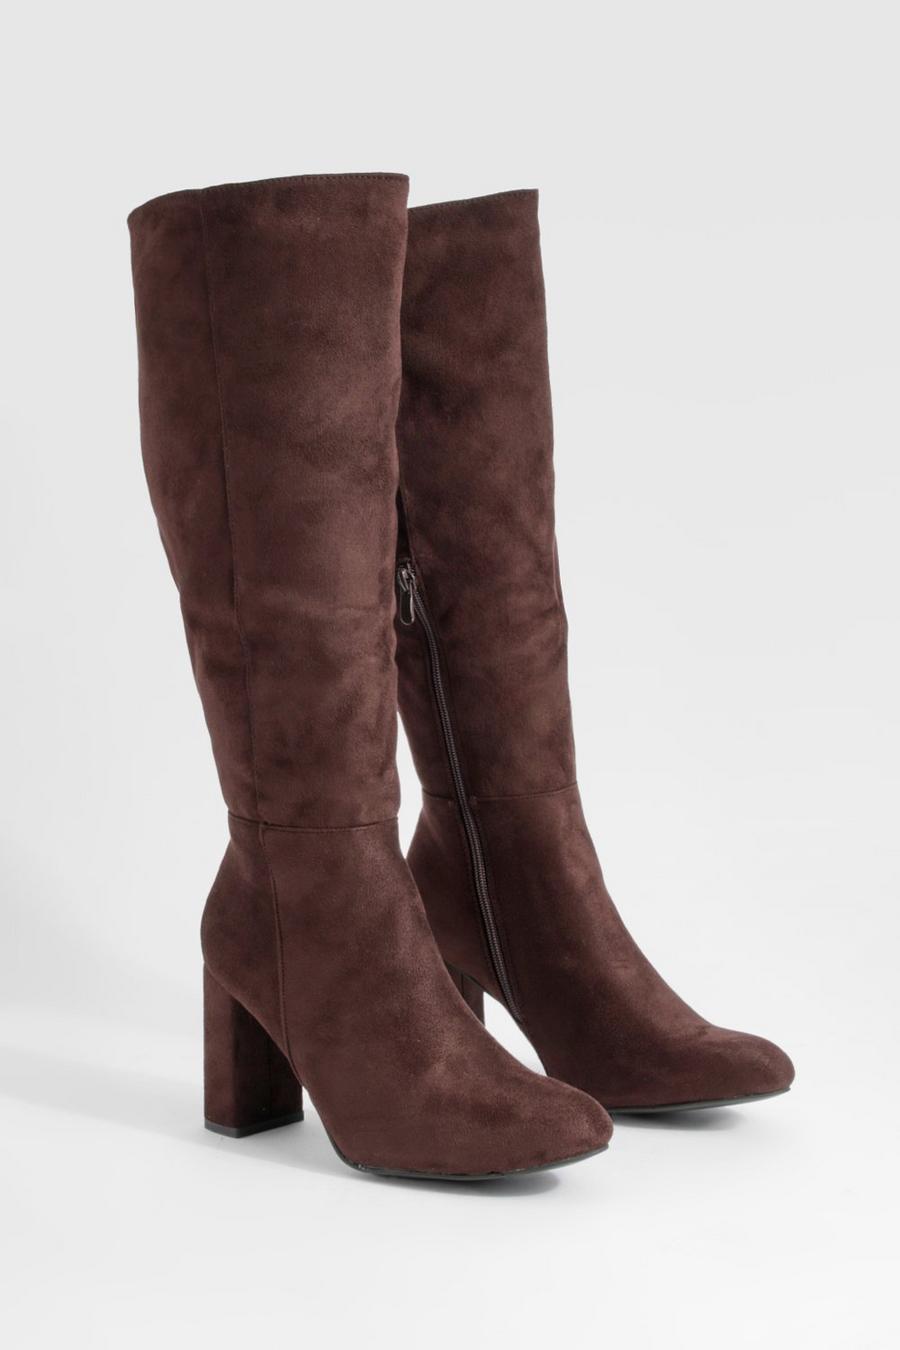 Chocolate brown Wide Fit Block Heel Knee High Pull On Boots